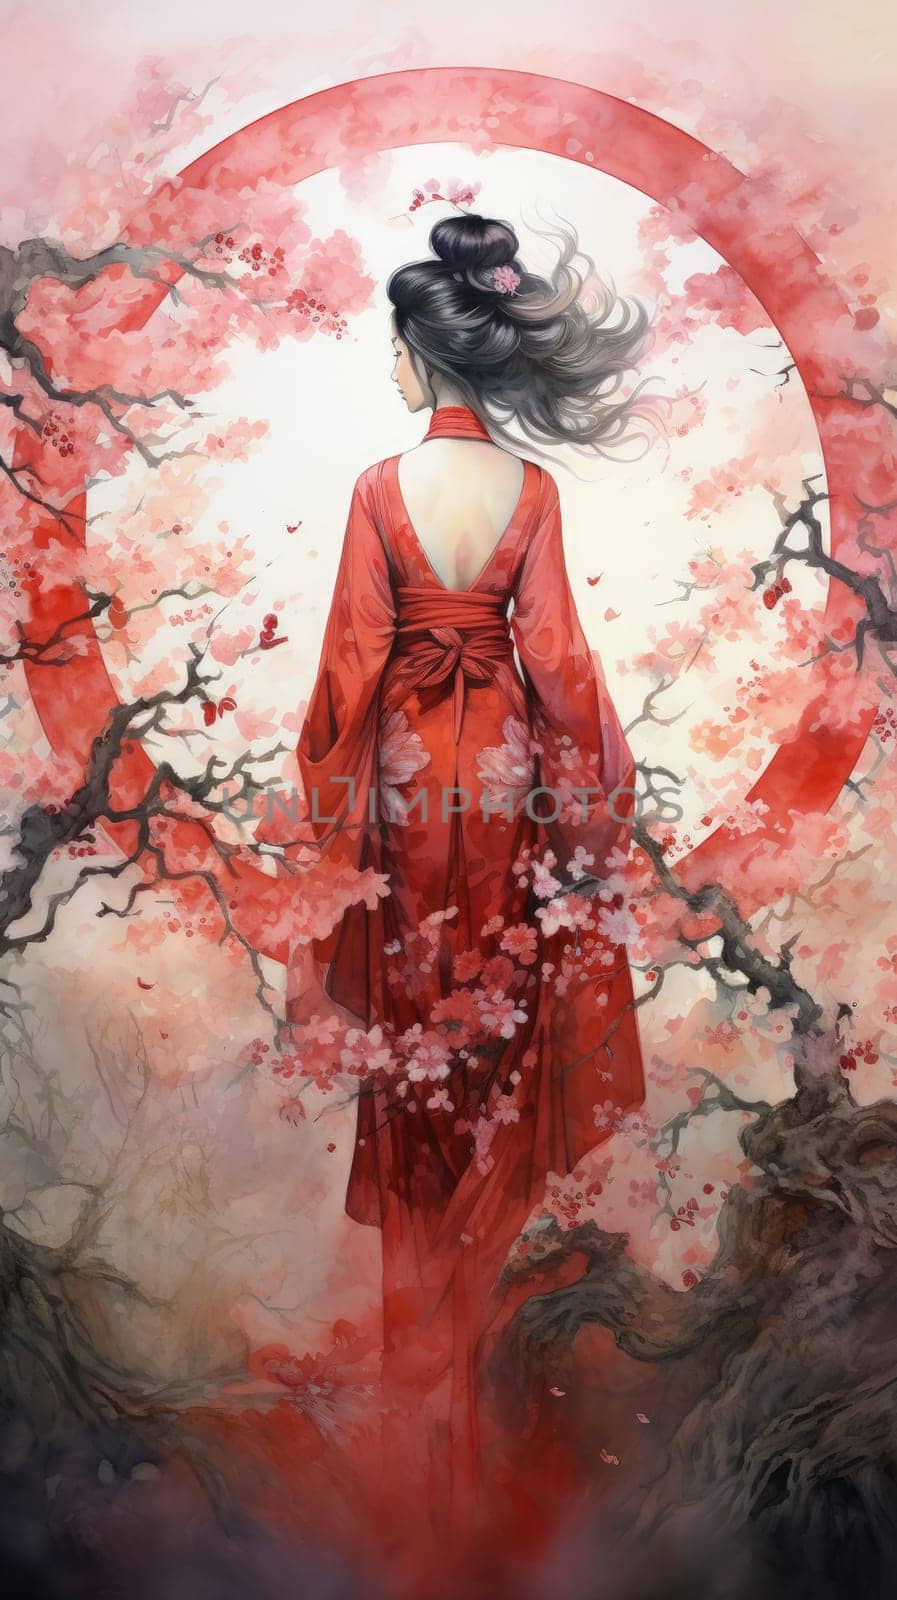 A geisha adorned in a vibrant red kimono, bathed in the warm hues of a celestial redshift